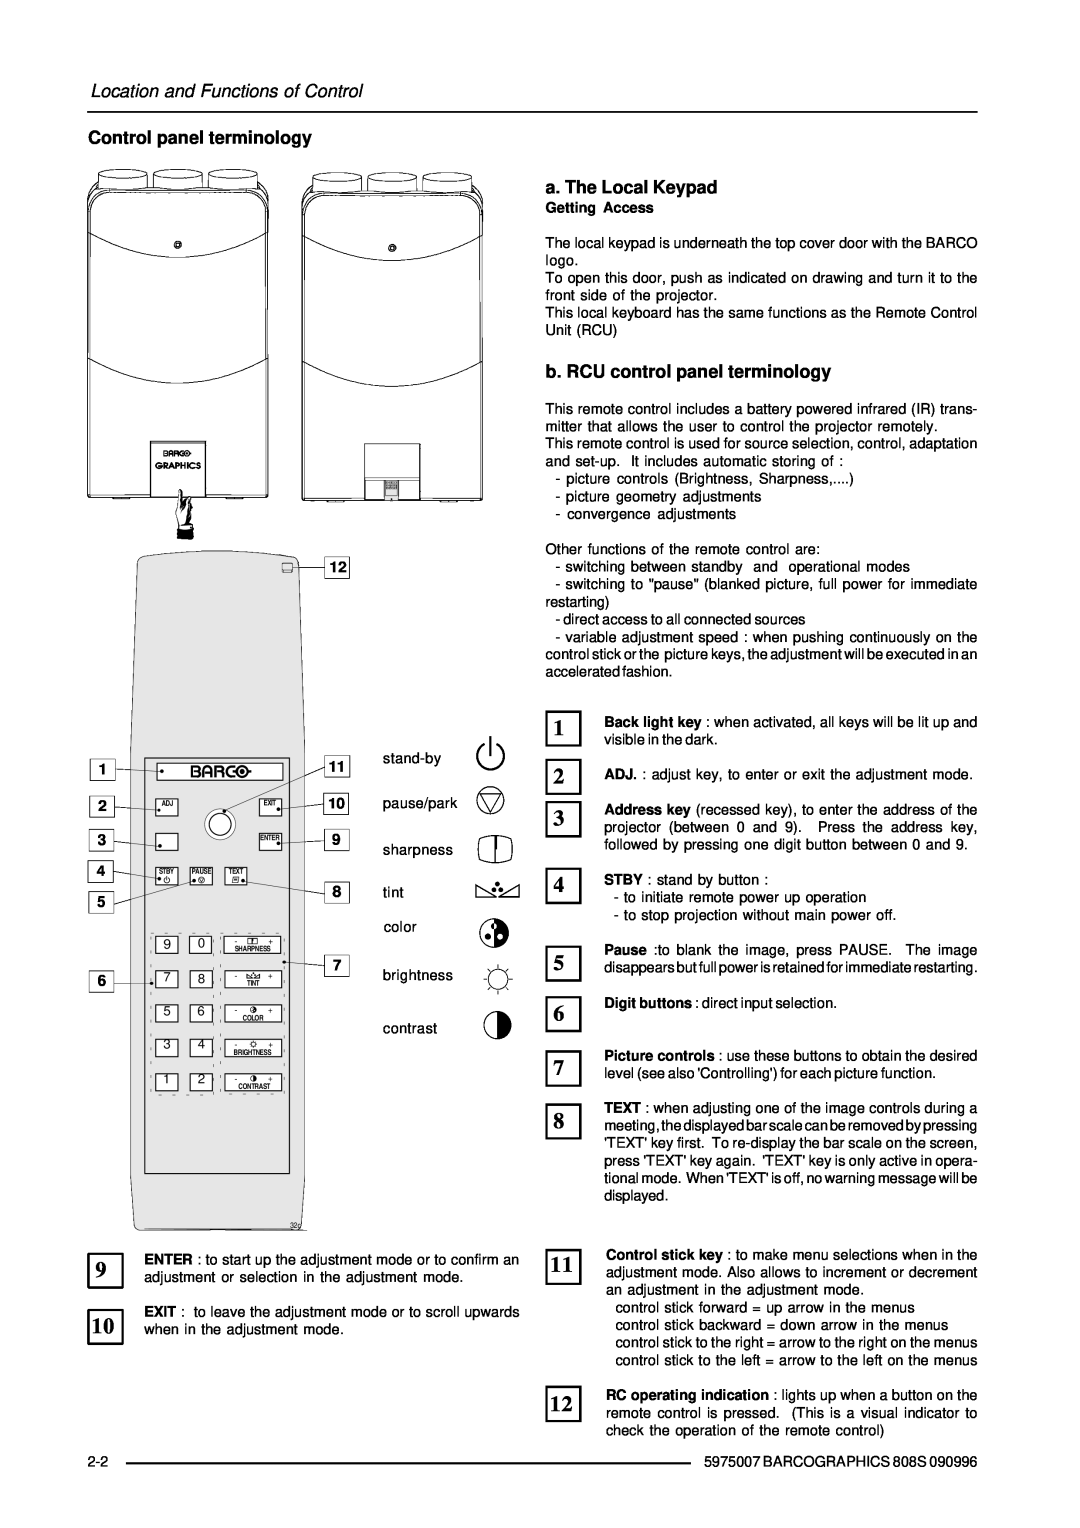 Barco R9000901, R9000908 Control panel terminology a. The Local Keypad, b. RCU control panel terminology, Getting Access 